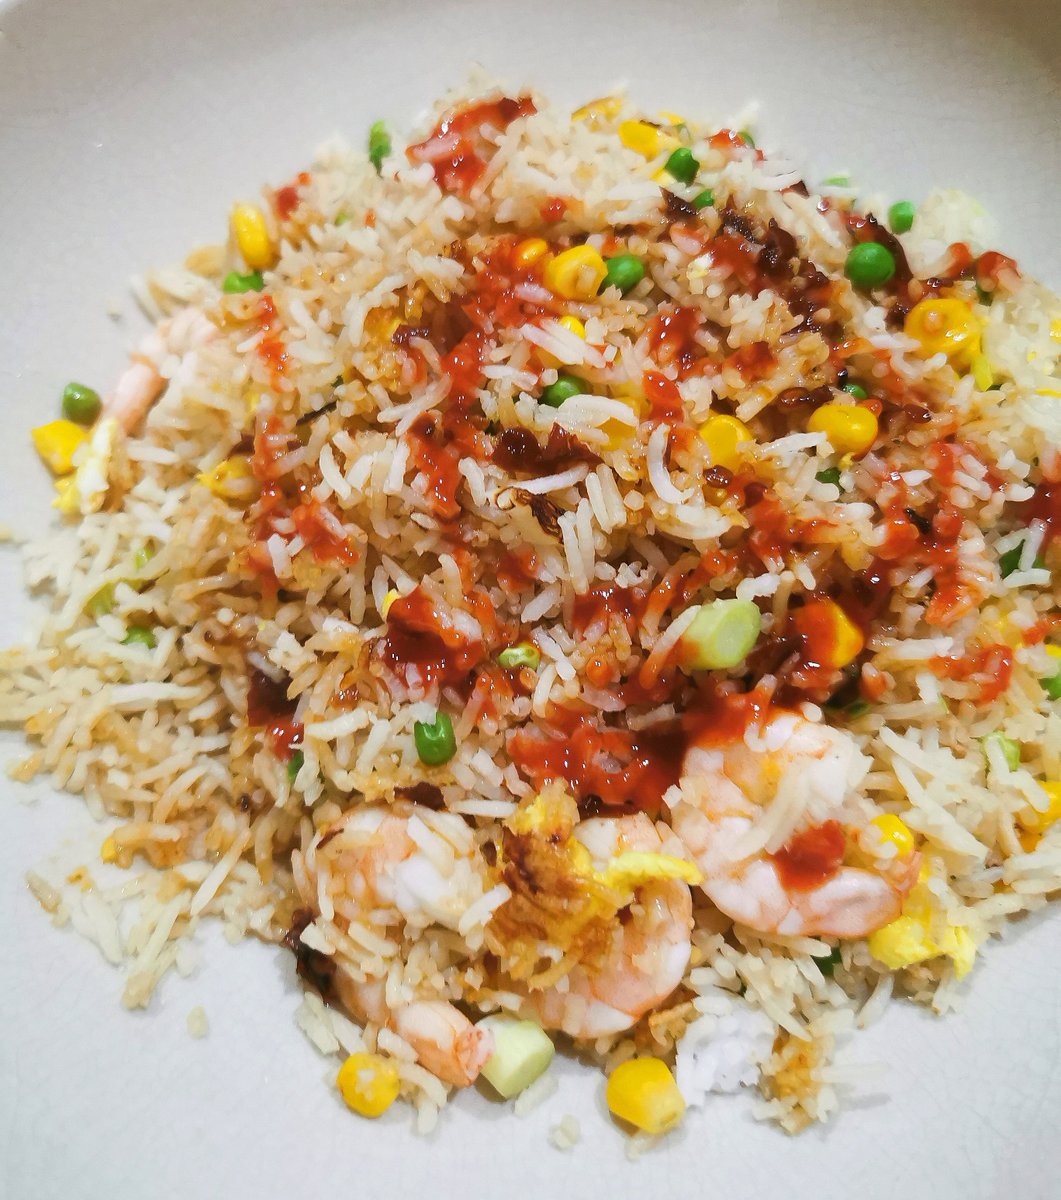 Yeung Chow (Cantonese fried rice) spiced up with sriracha sauce #comedinewiththeesk